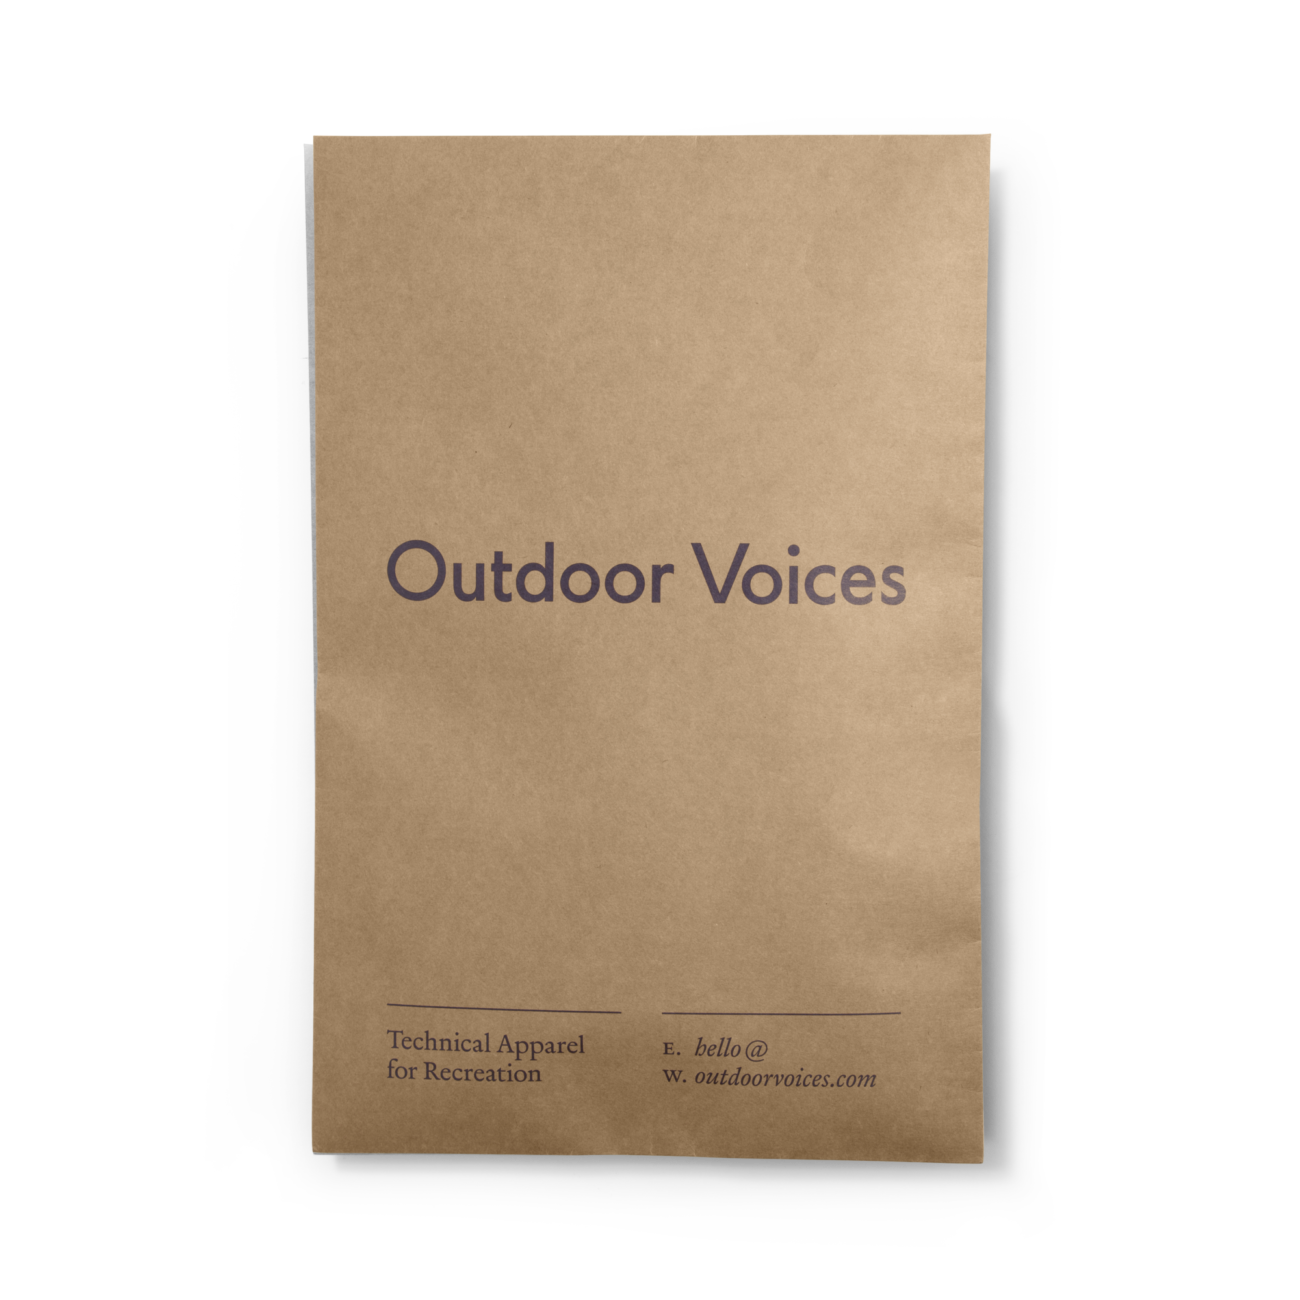 Outdoor Voices stores apparel in ready-to-ship, clear bags that are placed in a kraft mailer for shipping. In storage and in shipping, the bag protects apparel from dirt, liquid, or snags. What every brand can learn from Amazon's Frustration-Free Packaging guidelines